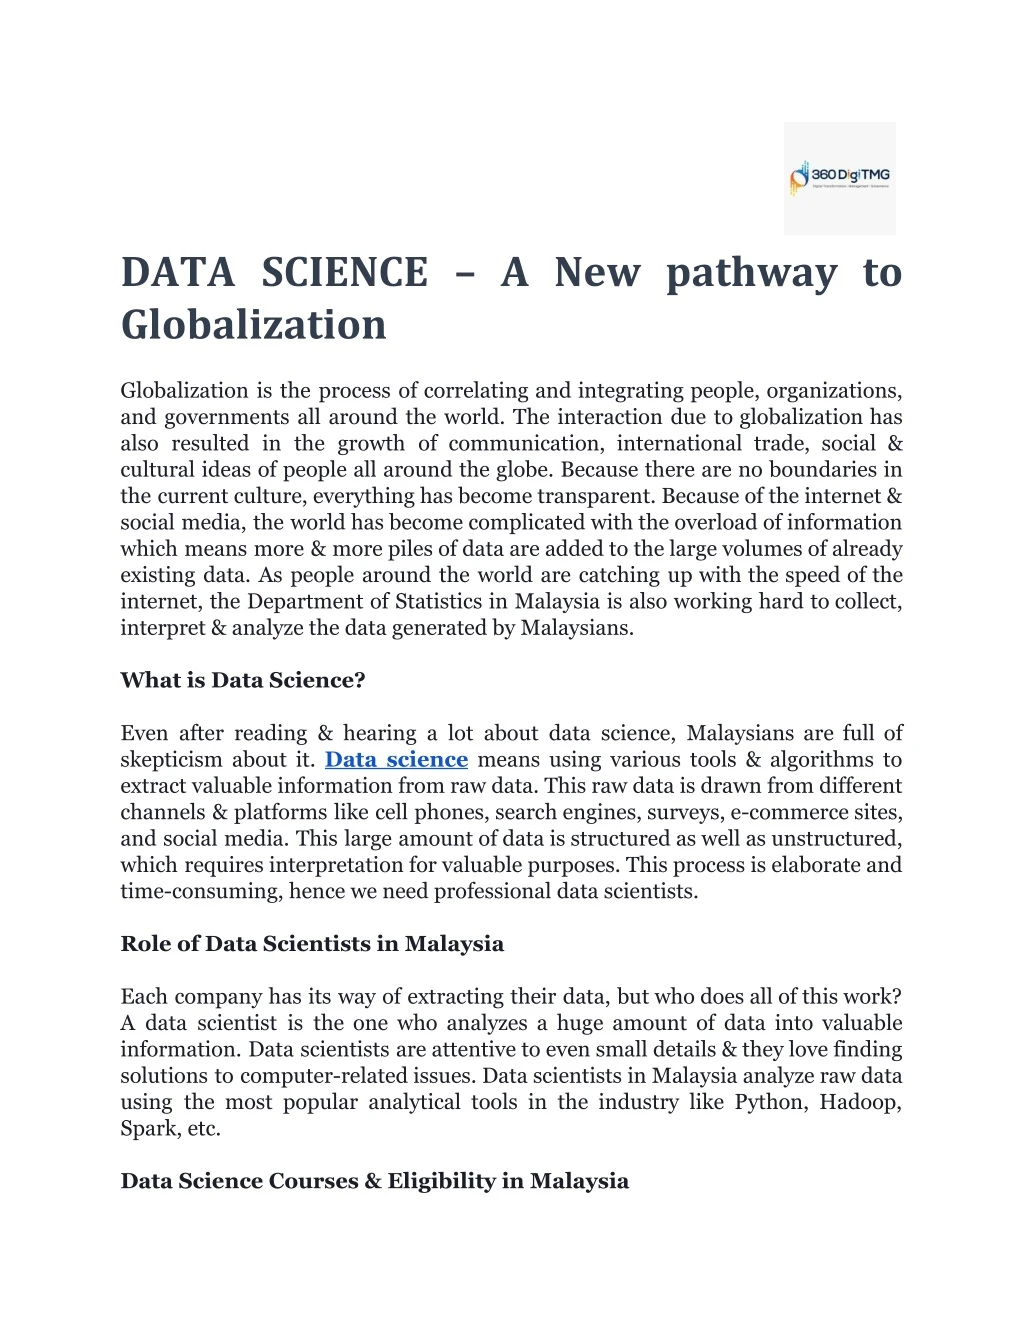 data science a new pathway to globalization